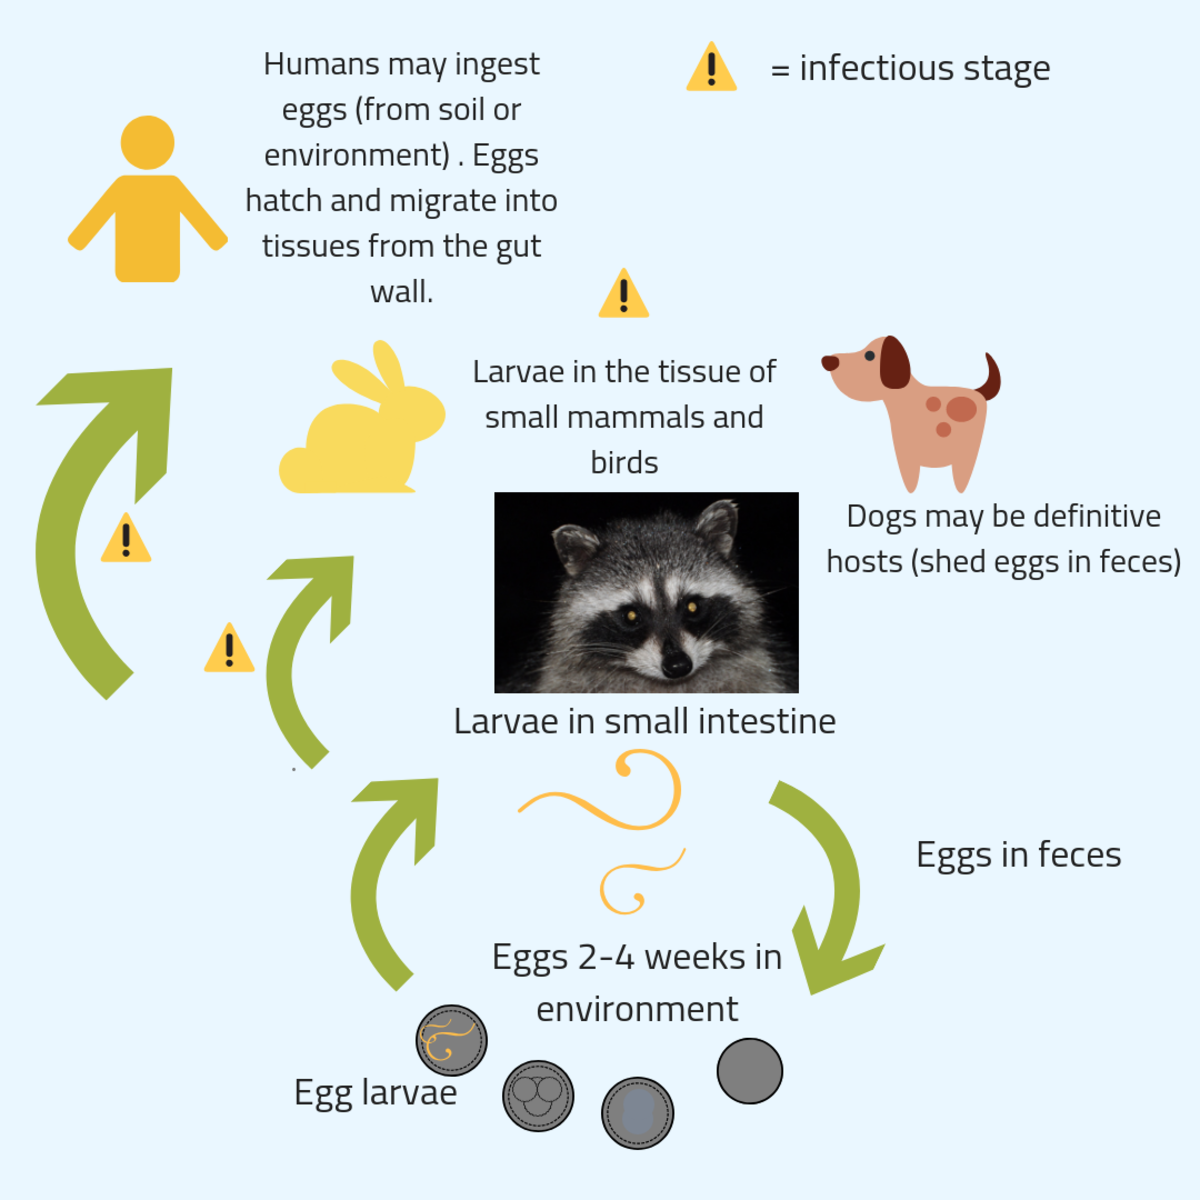 Raccoon roundworm lifecycle. Sourced from the CDC.